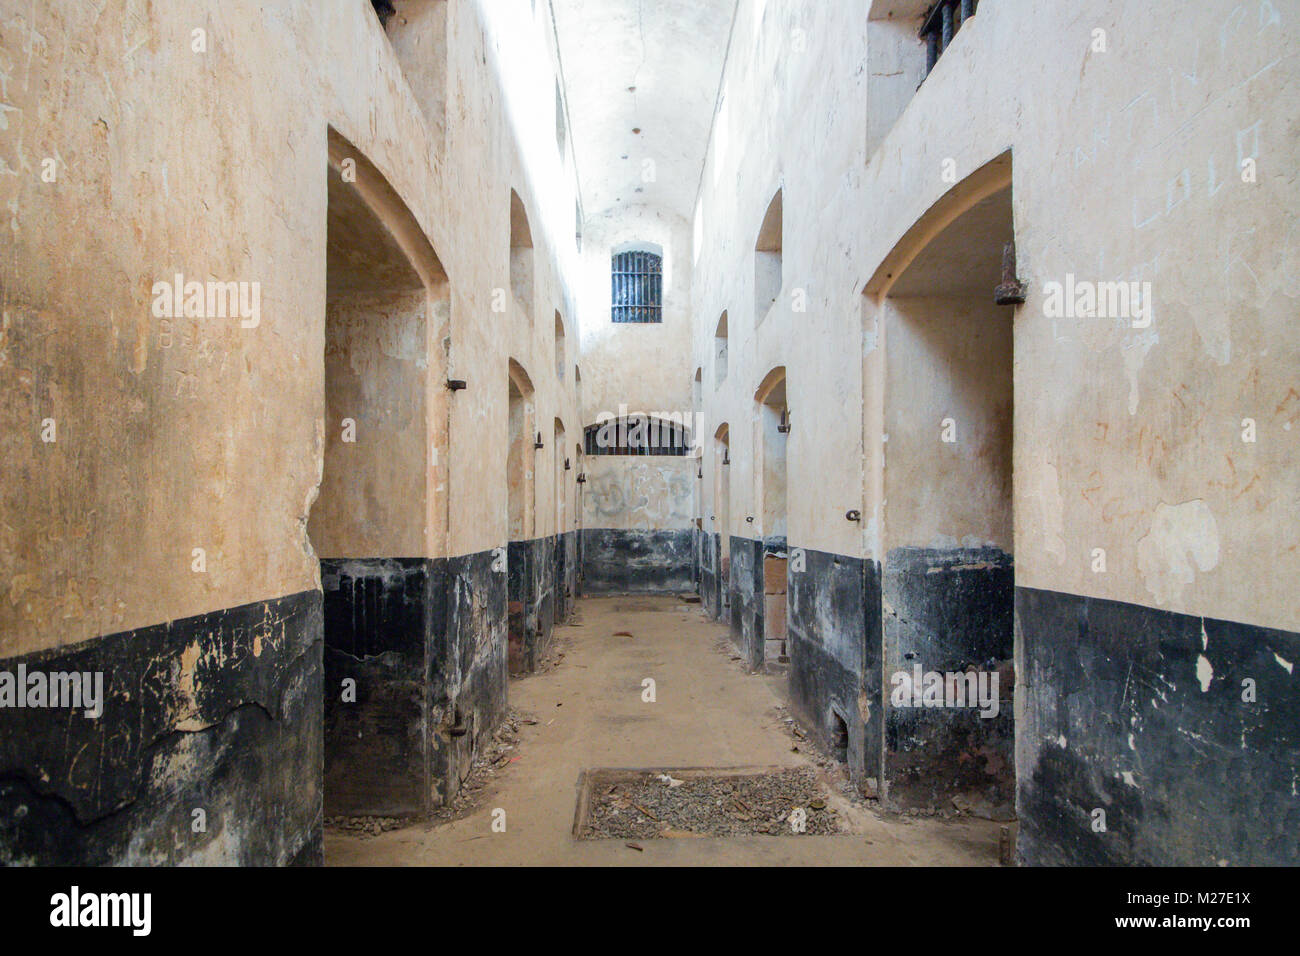 Isolation cells inside a penal colony at Ile Royale, one of the islands of Iles du Salut (Islands of Salvation) in French Guiana. These islands were p Stock Photo